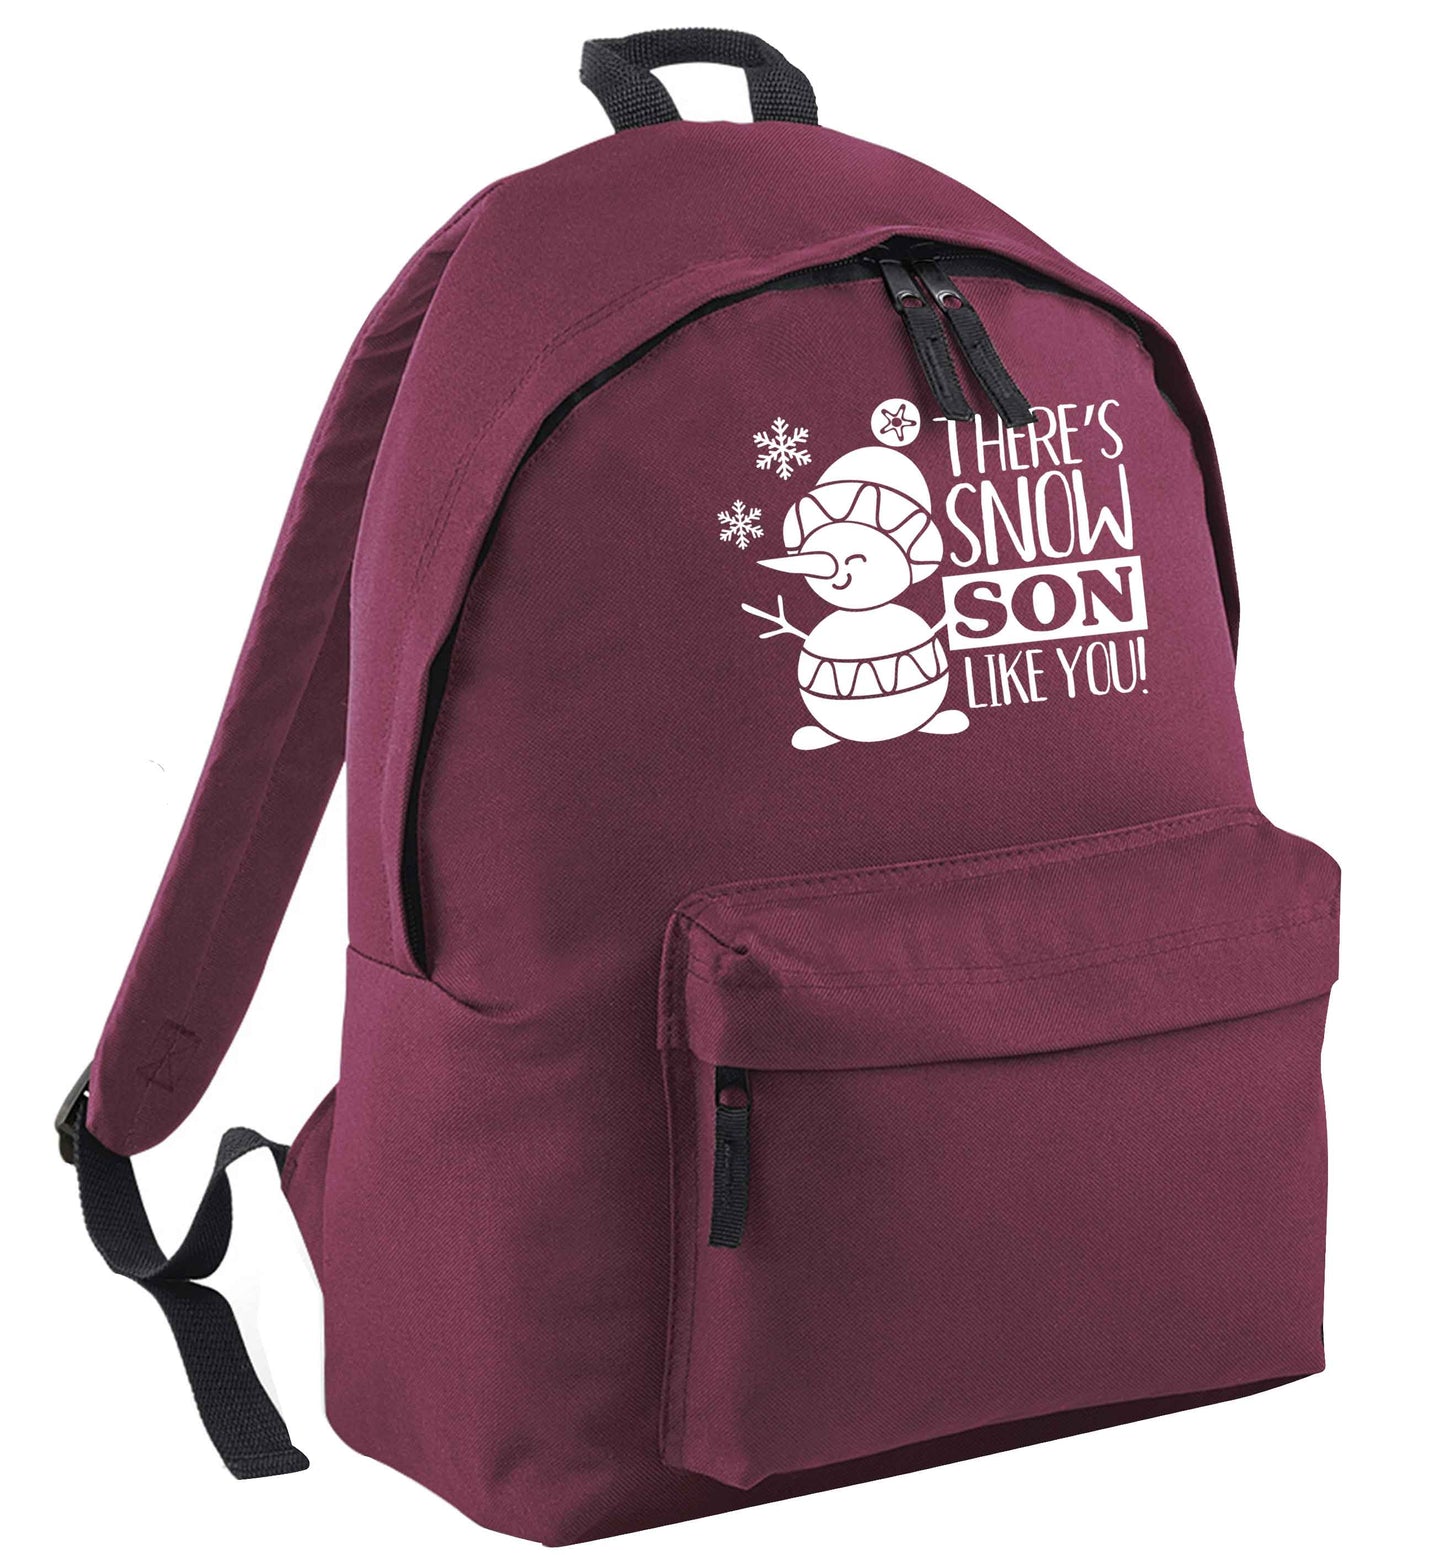 There's snow son like you maroon adults backpack